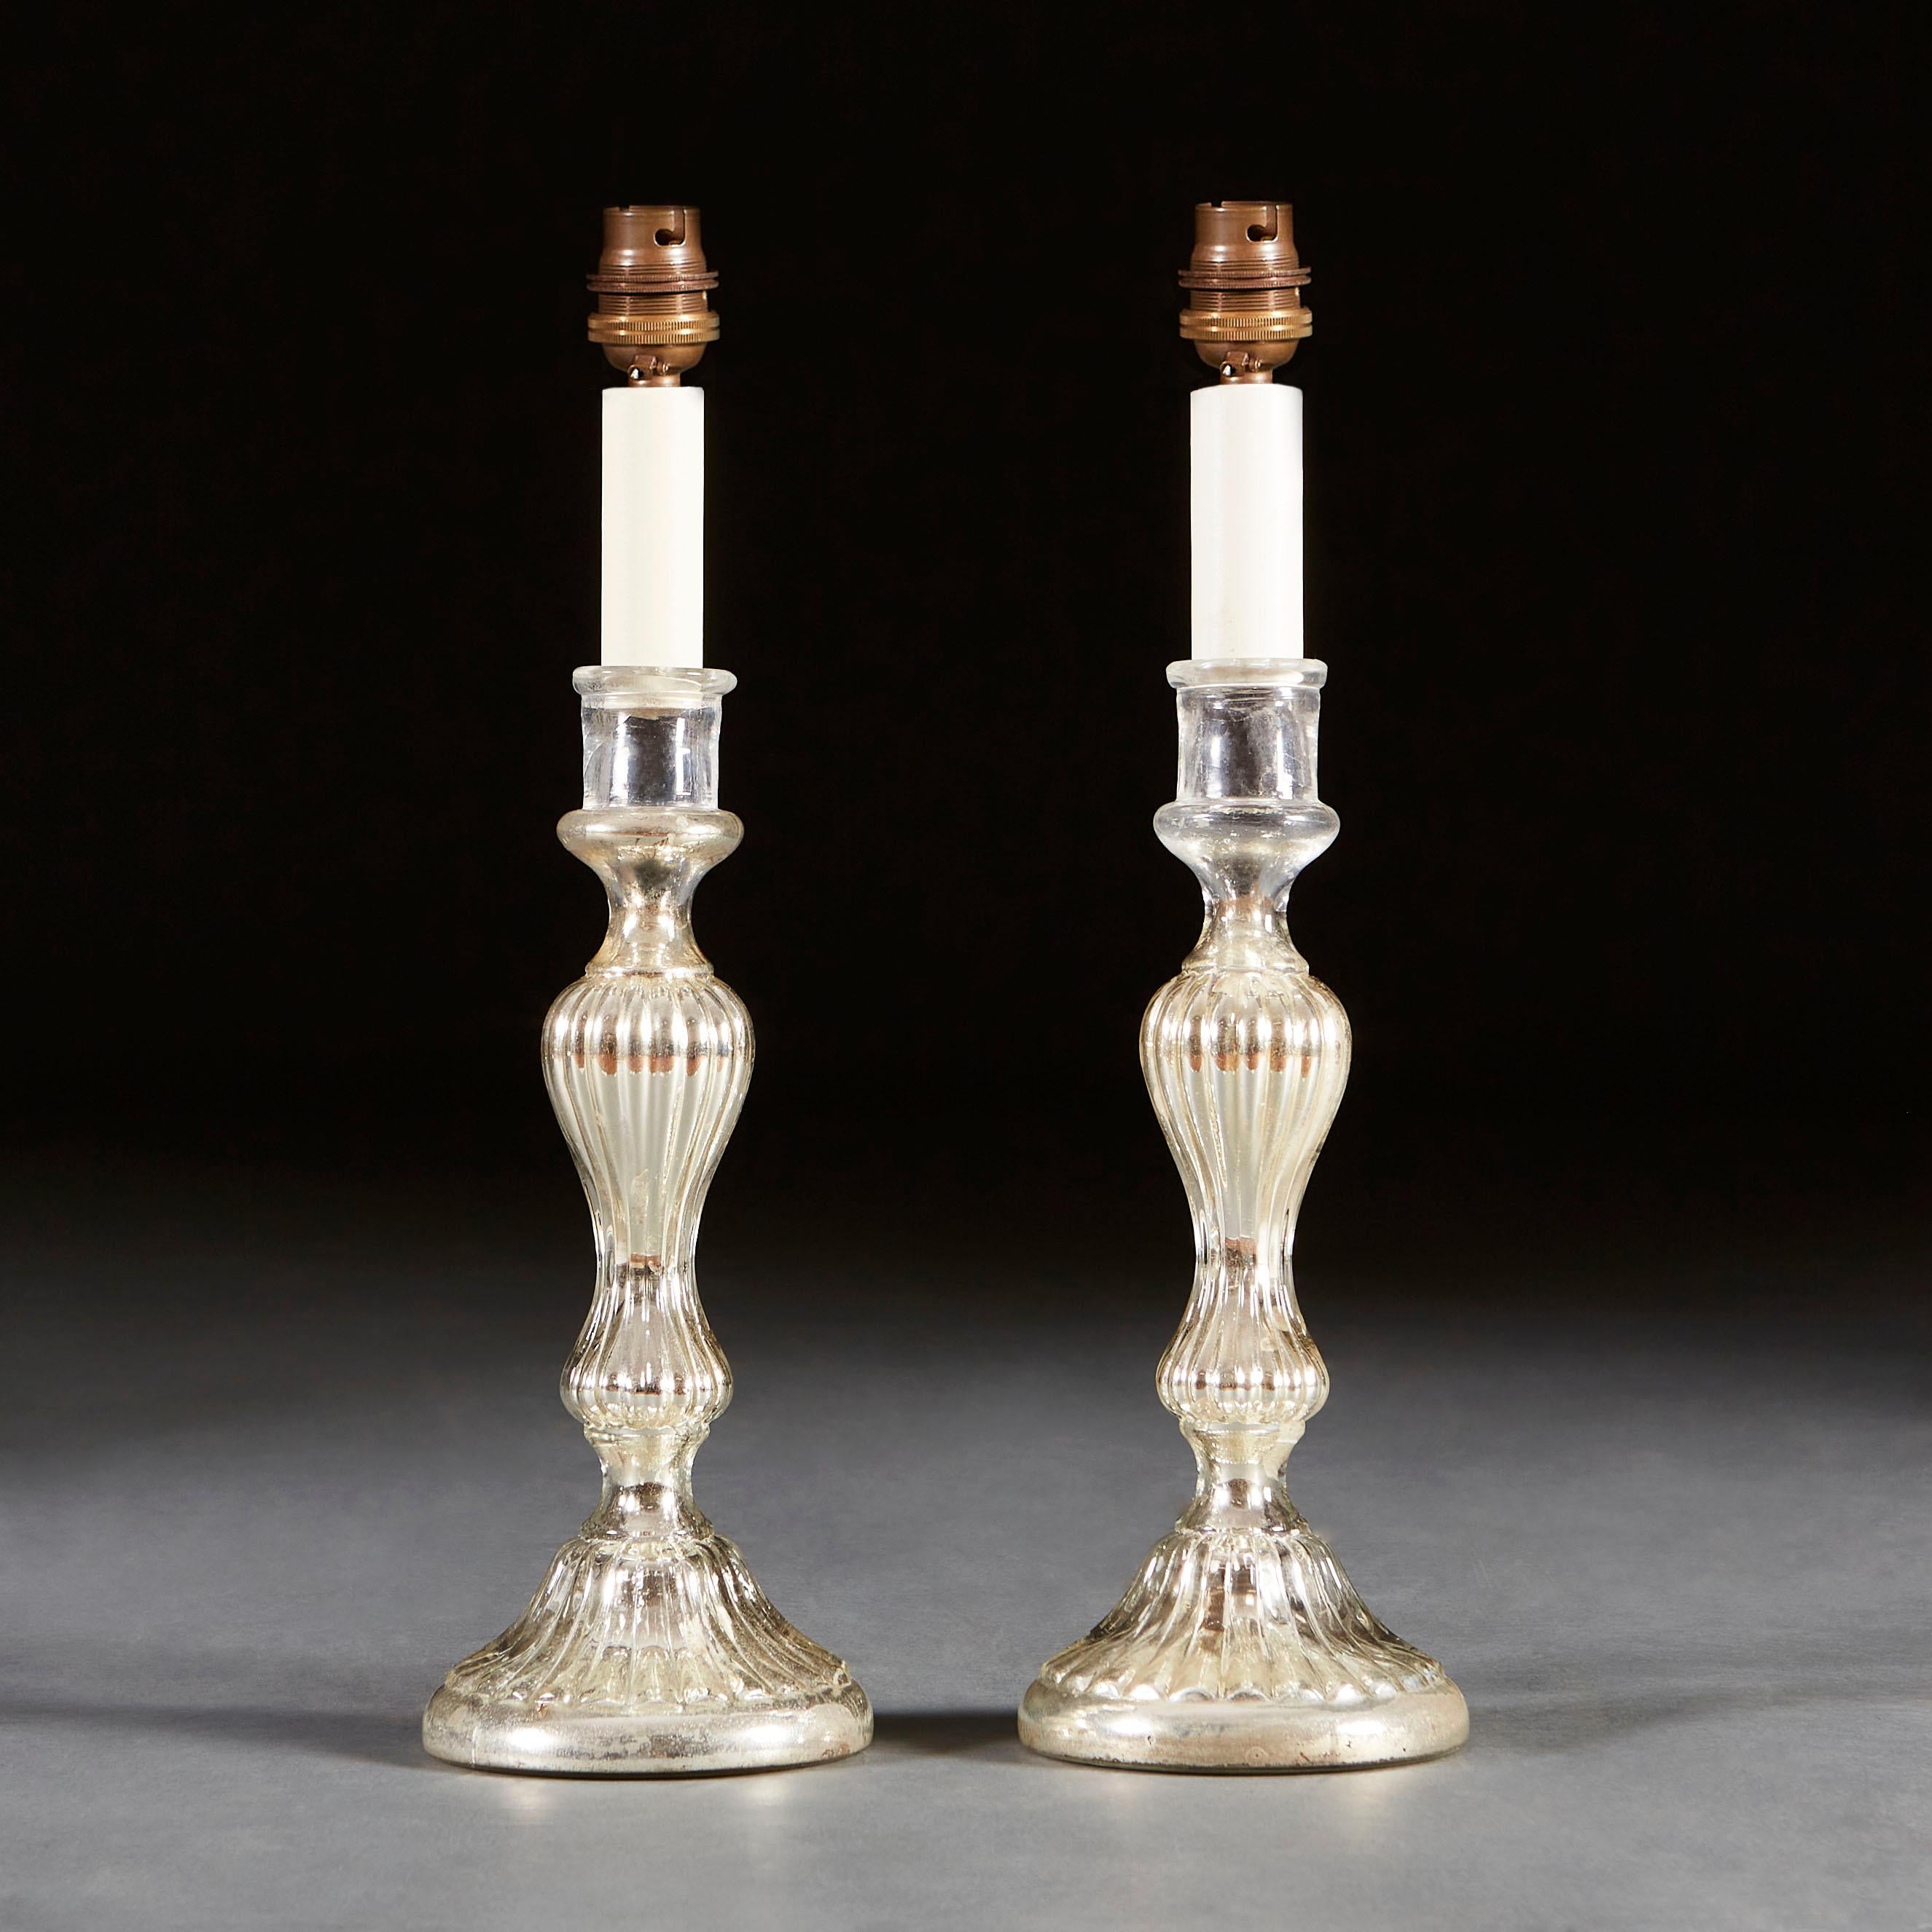 A pair of mercury glass candlesticks with gadrooning and shaped stems, supported on circular bases, now as lamps.

Currently wired for the UK. Please enquire for rewiring services.

Please note: lampshades not included.